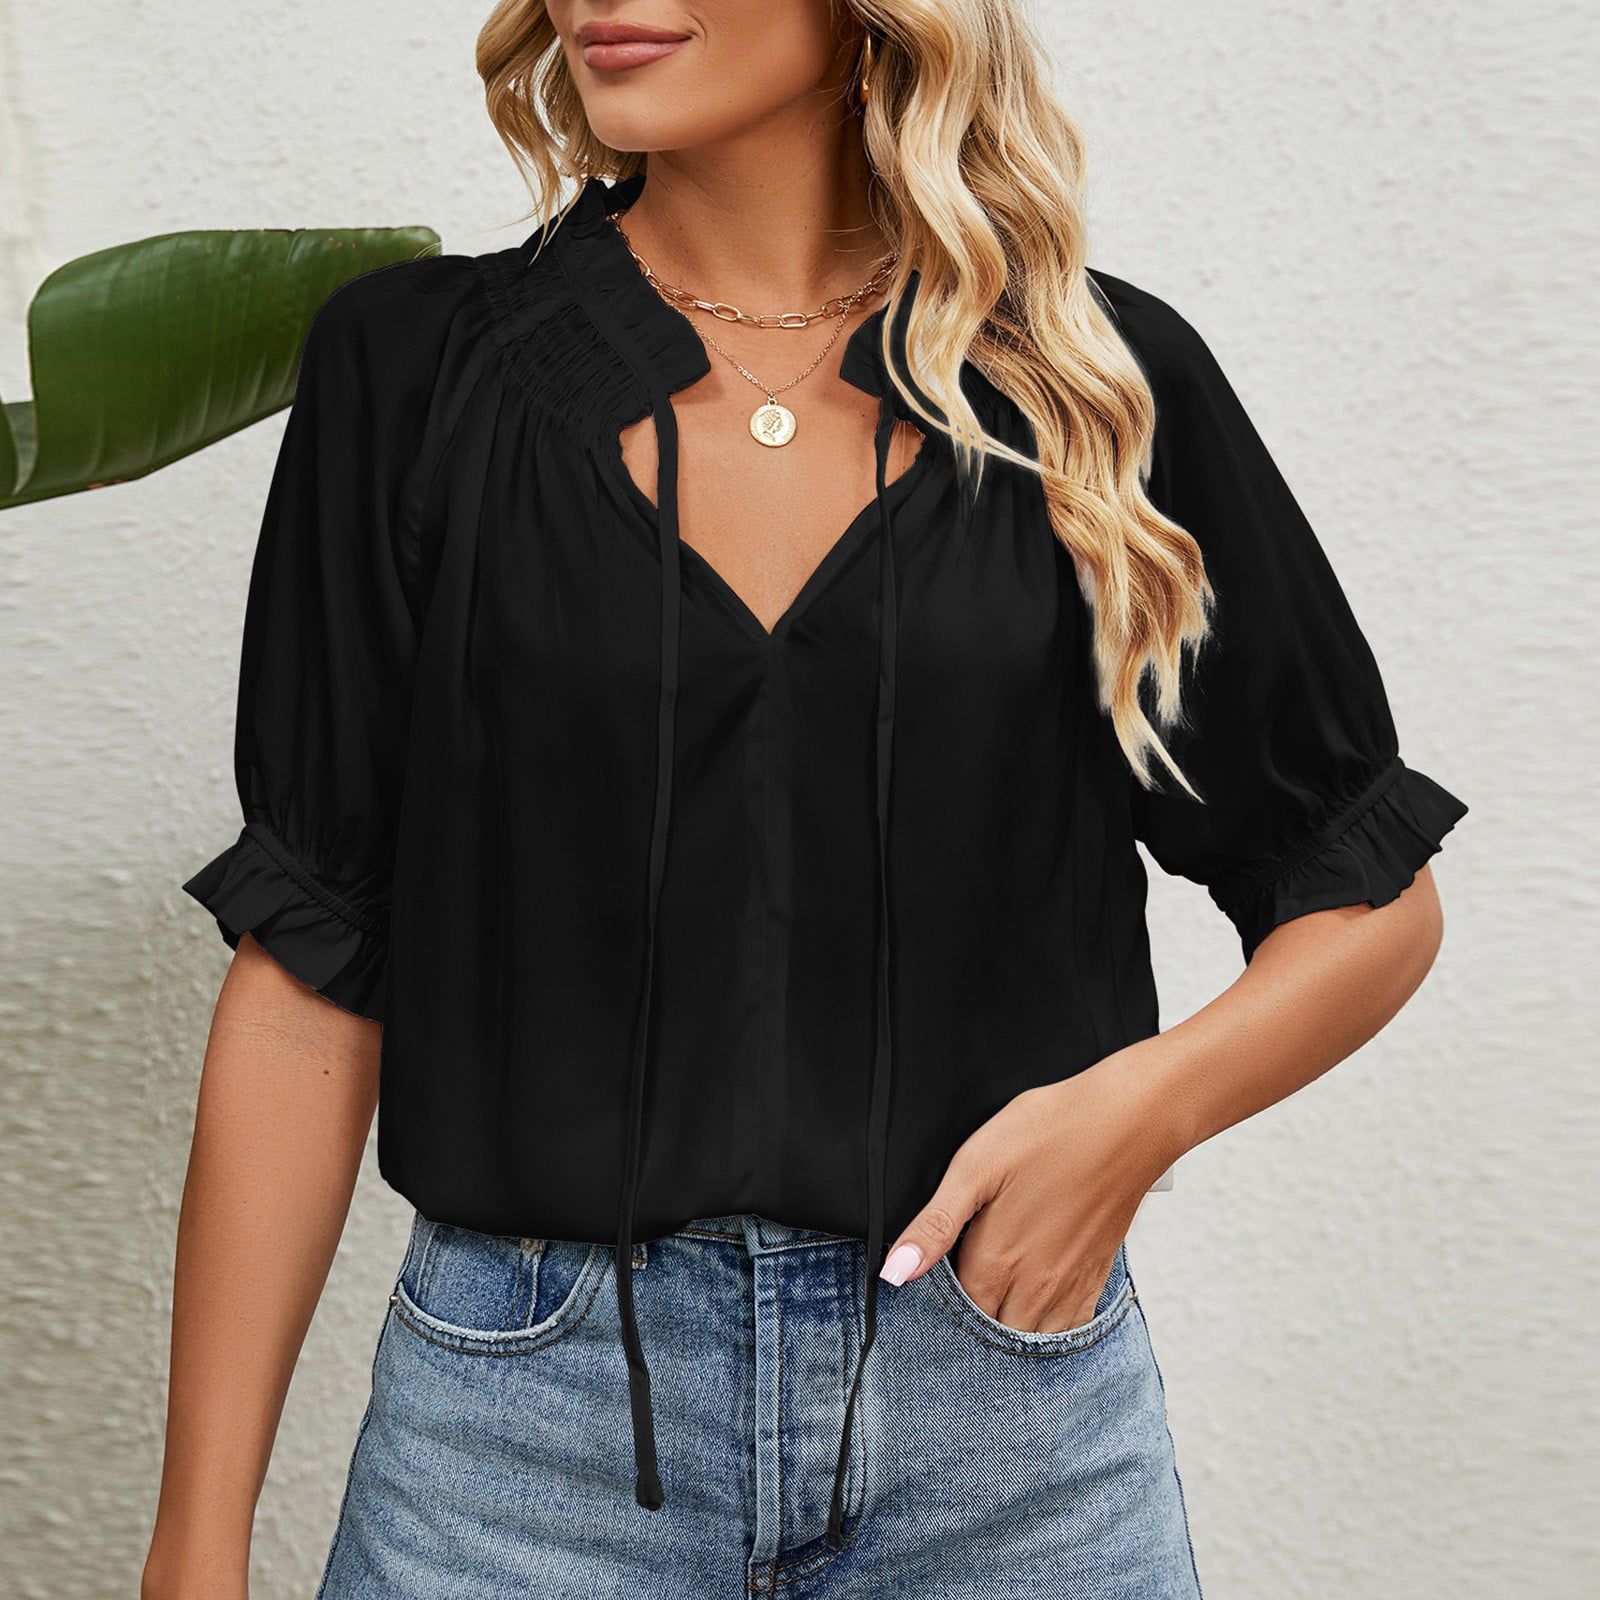 YYDGH Womens Long Sleeve Button Down Shirts V Neck Cotton Linen Blouses  Roll Up Casual Work Plain Solid Color Tops Black M 